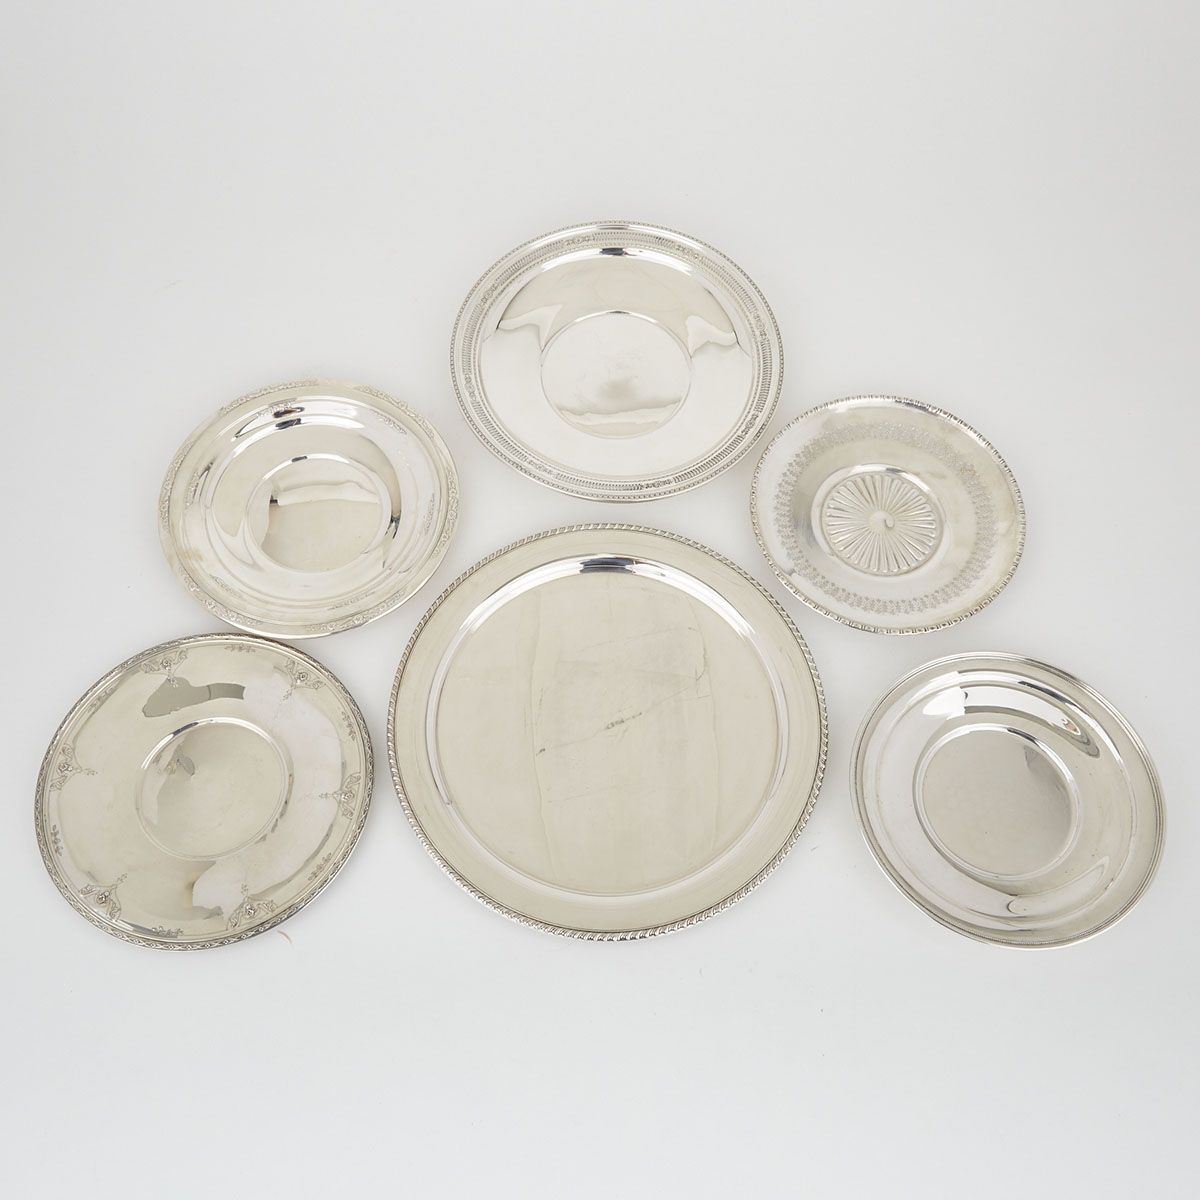 North American Silver Waiter and Five Cake Plates, 20th century